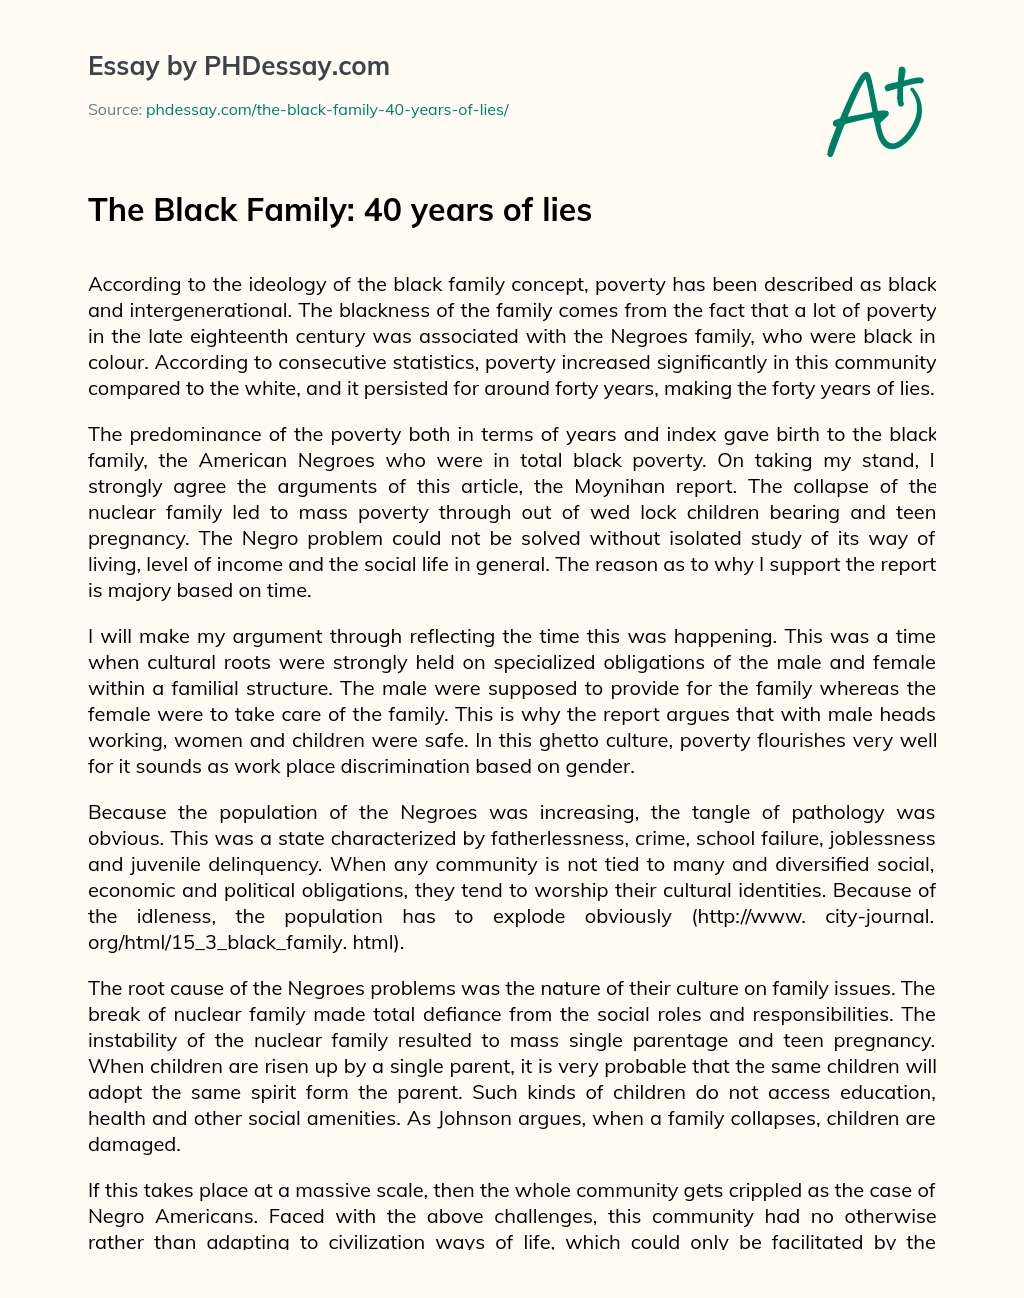 The Black Family: 40 years of lies essay